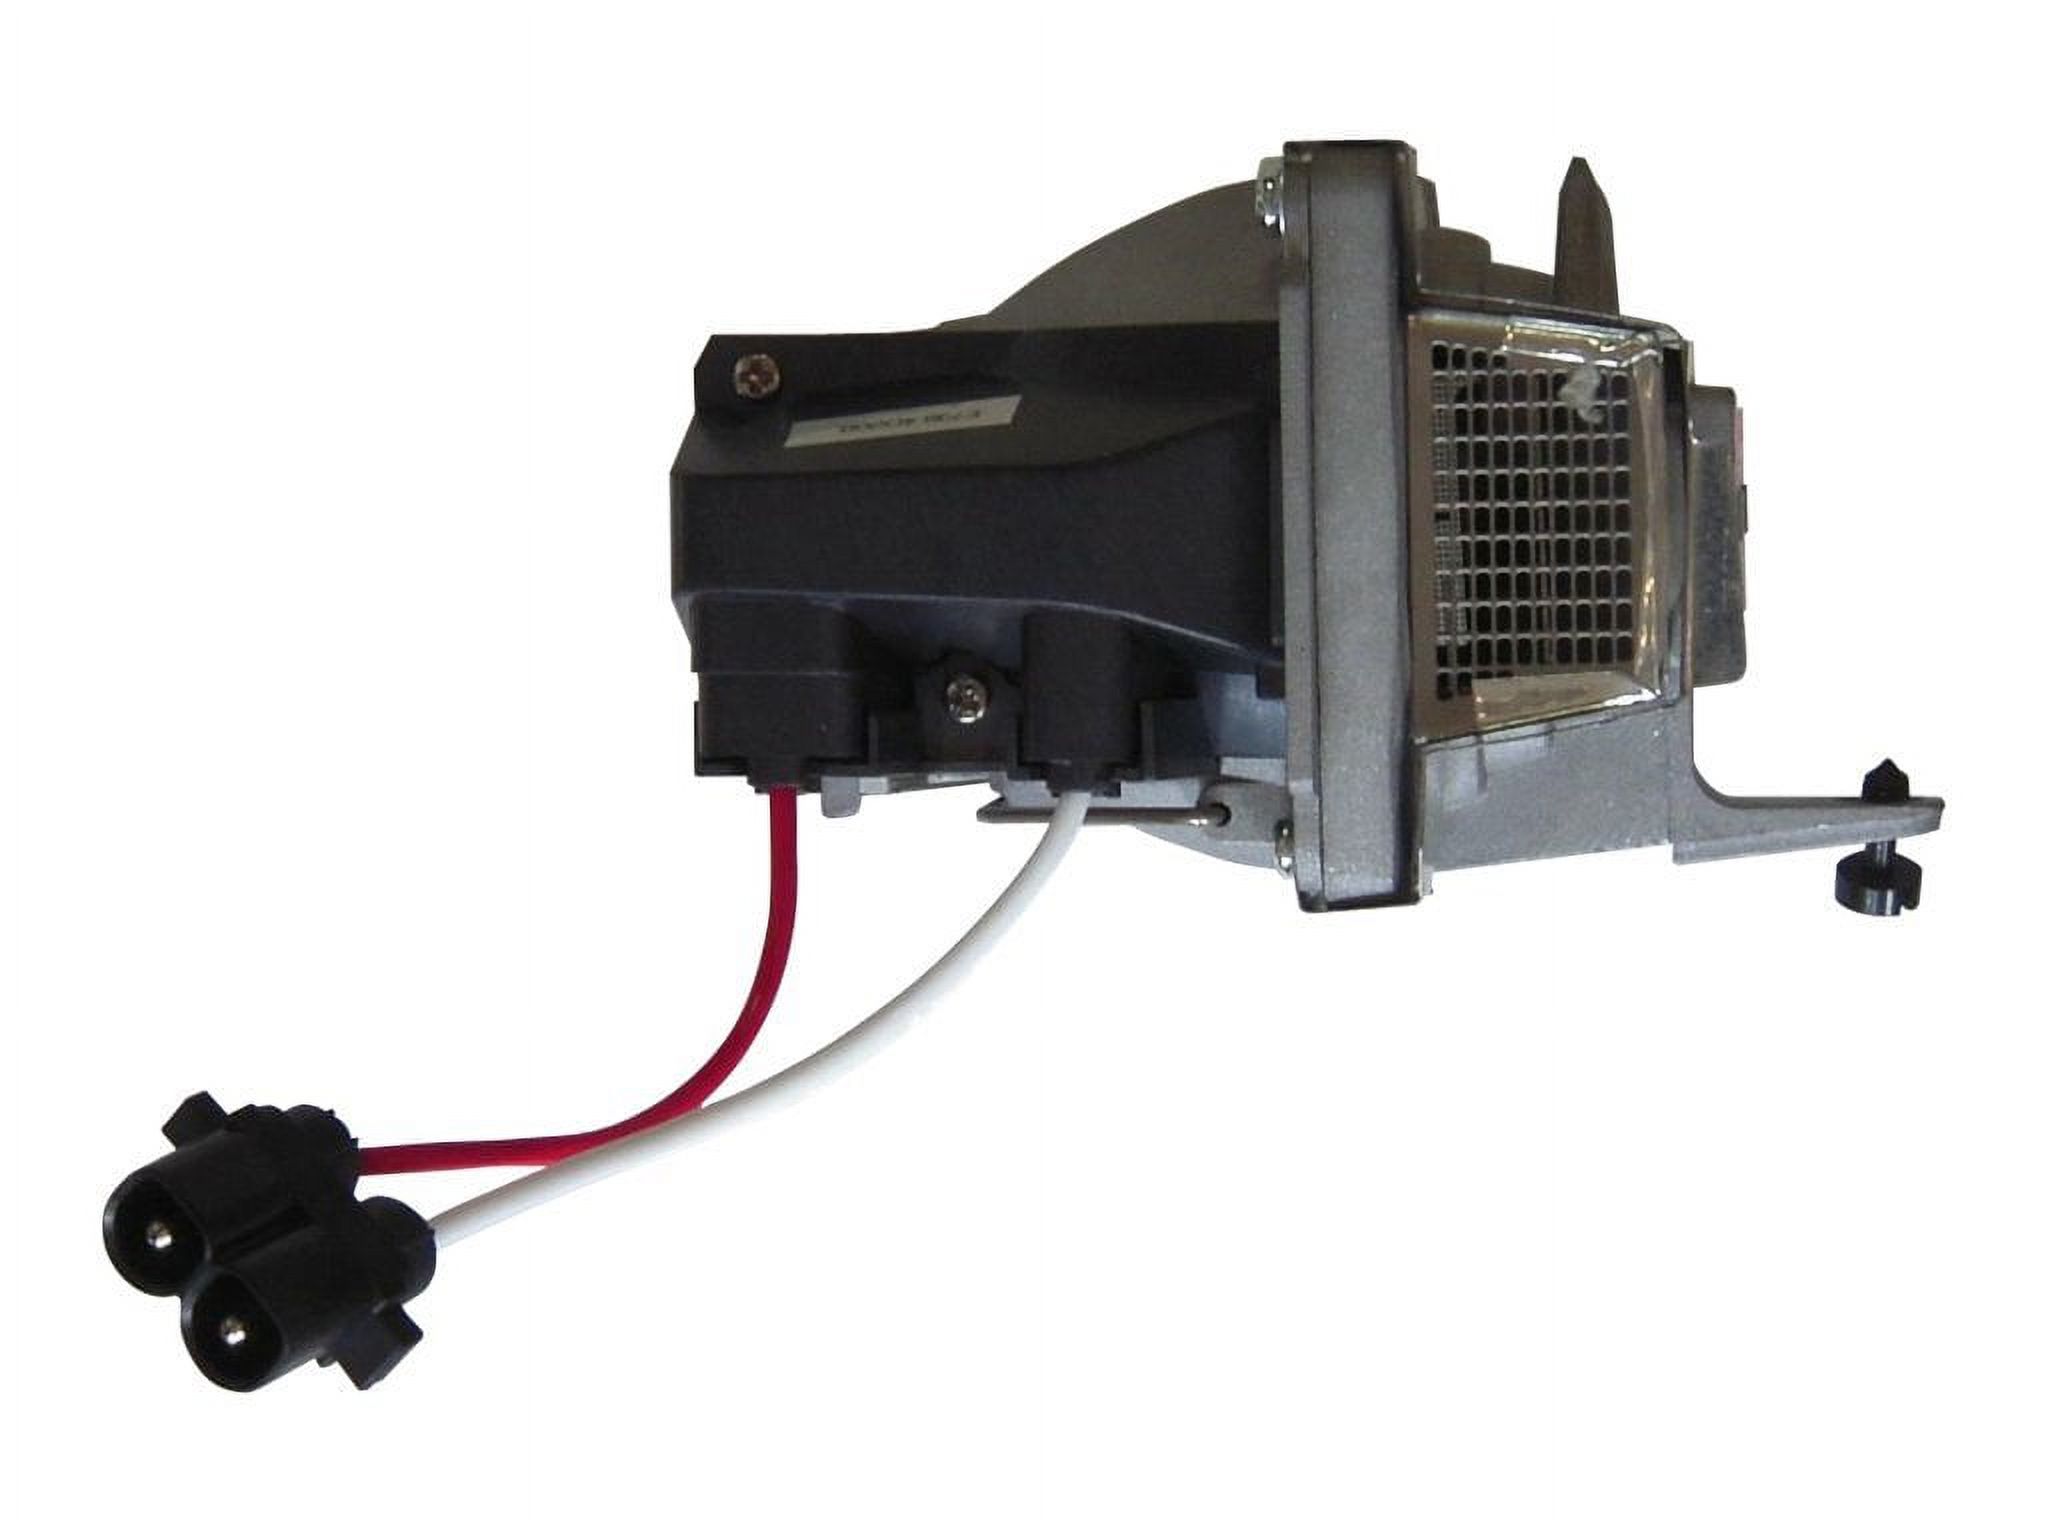 V7 200 W Replacement Lamp for InFocus IN32, IN34, IN34EP Replaces Lamp SP-LAMP-019 - image 3 of 4